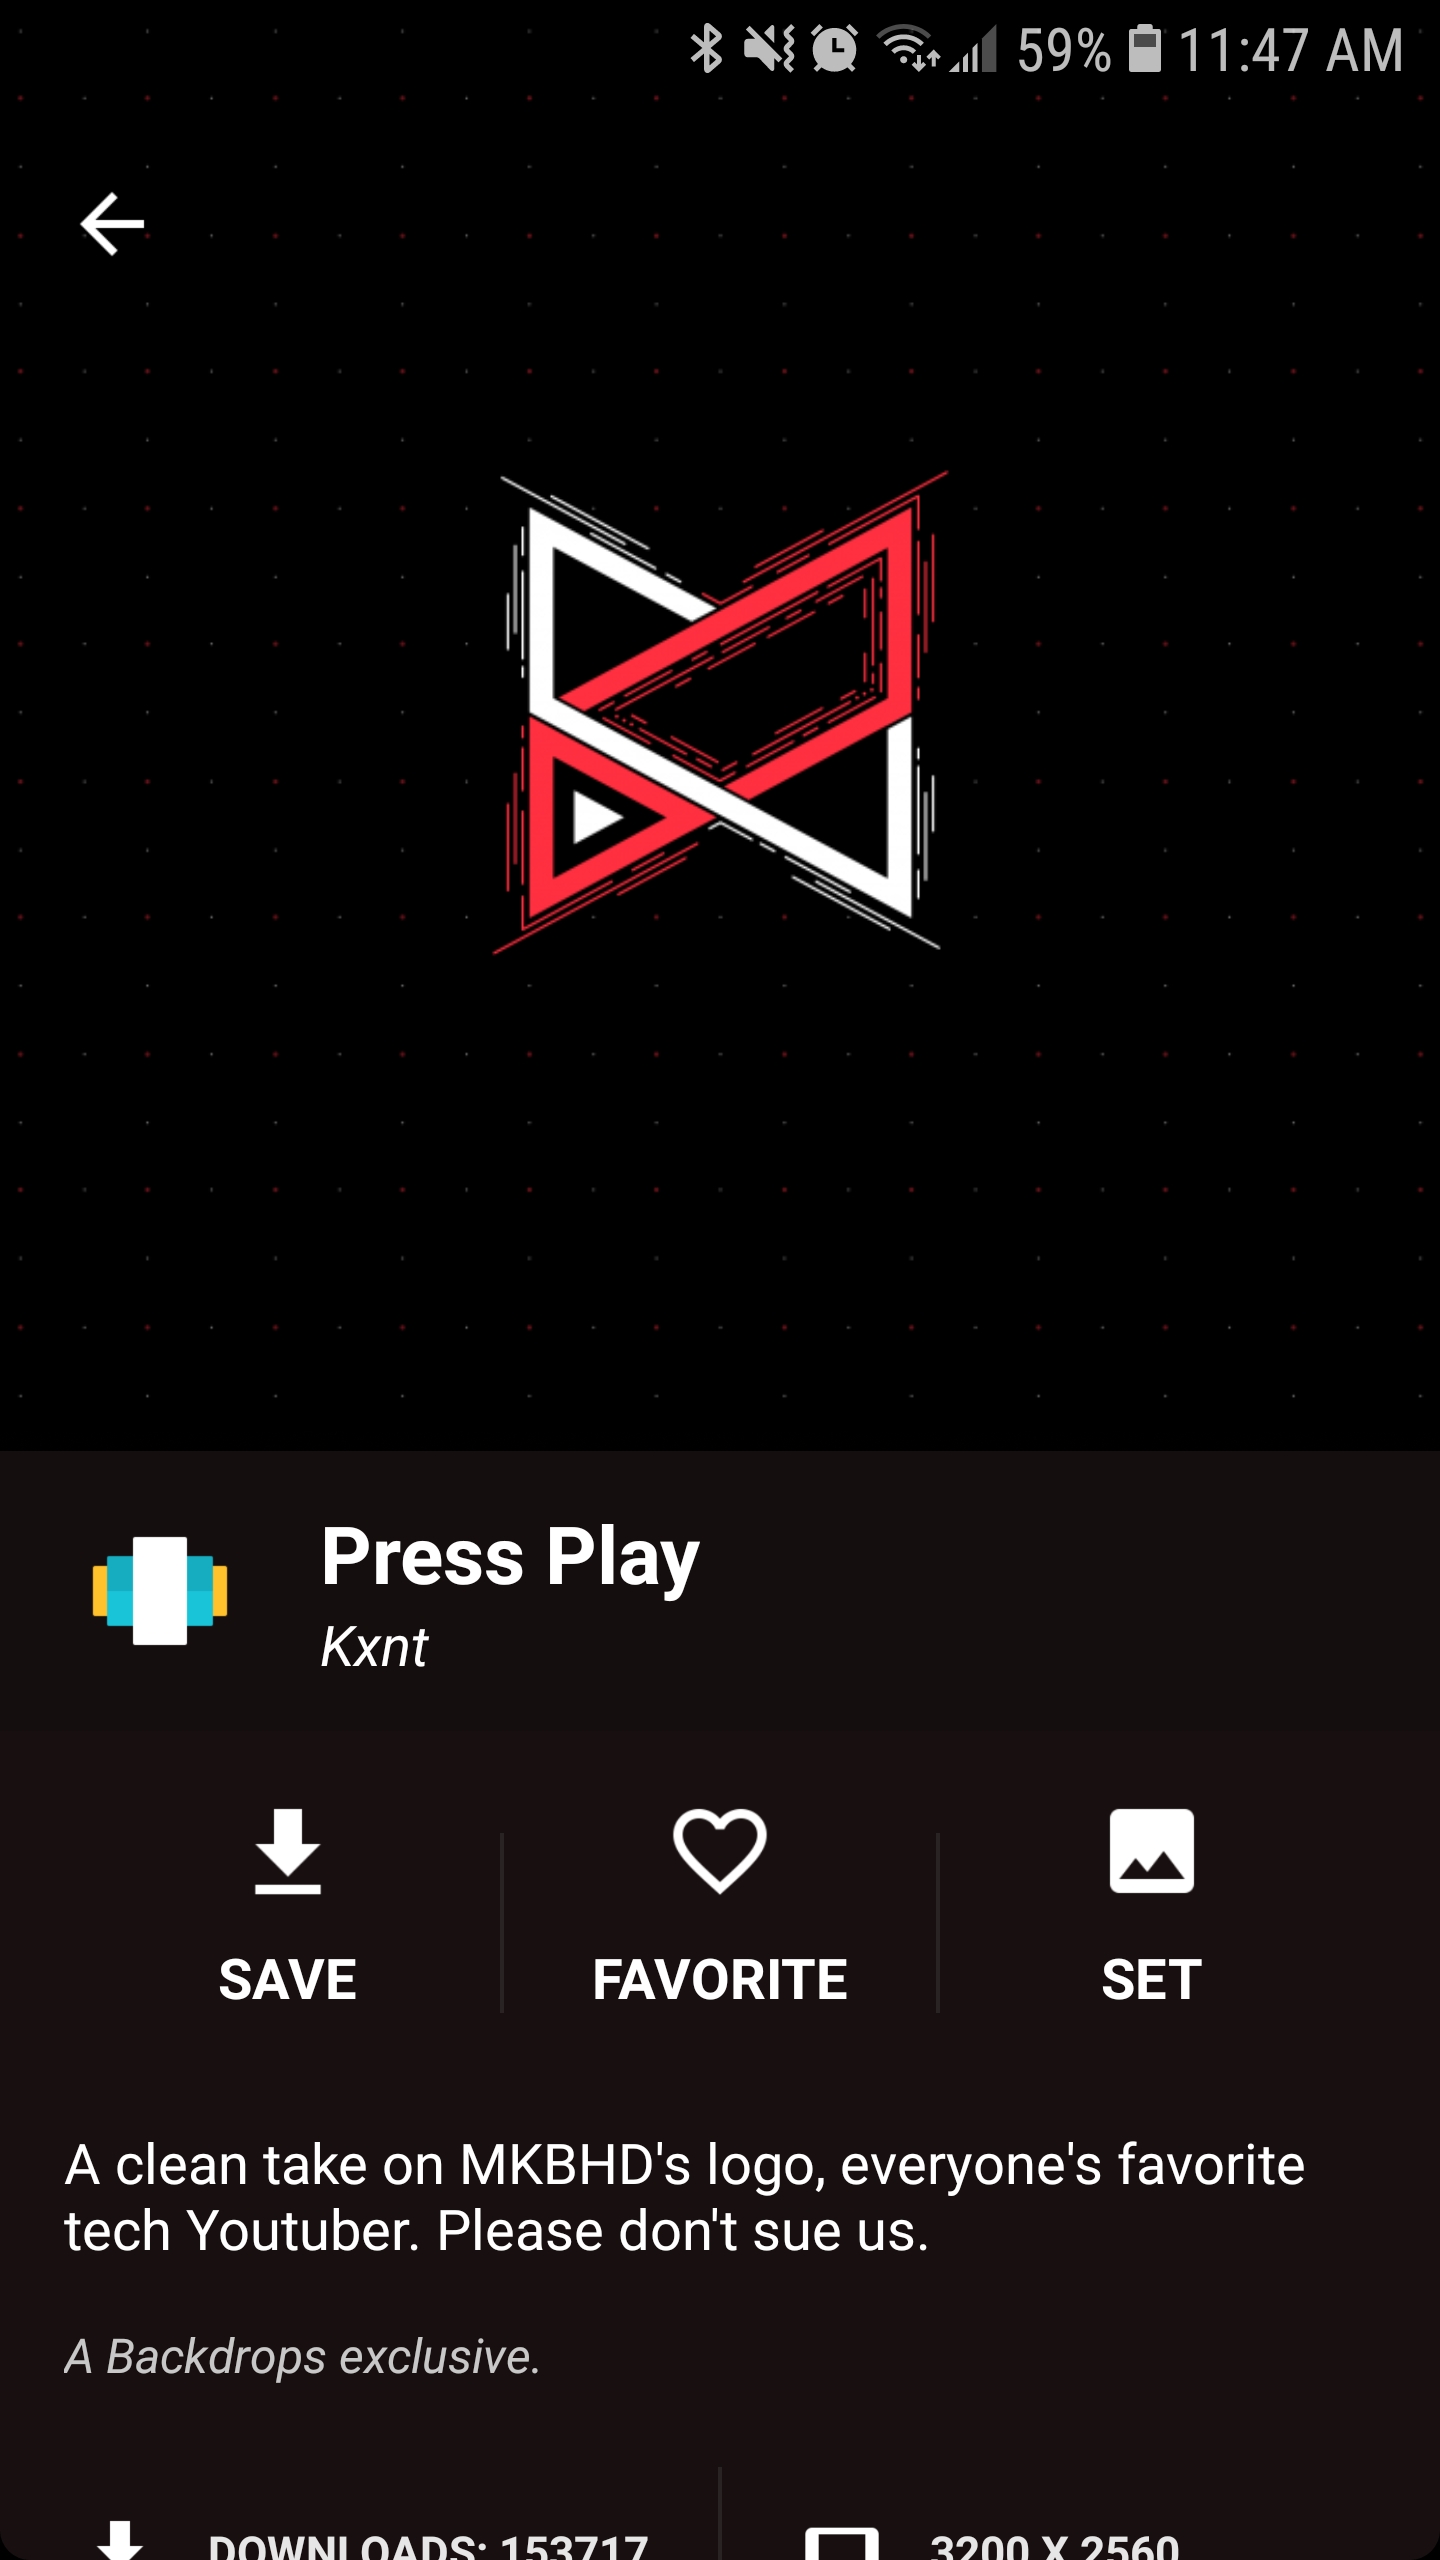 Just Found This In The Wallpaper App MkbHD Uses